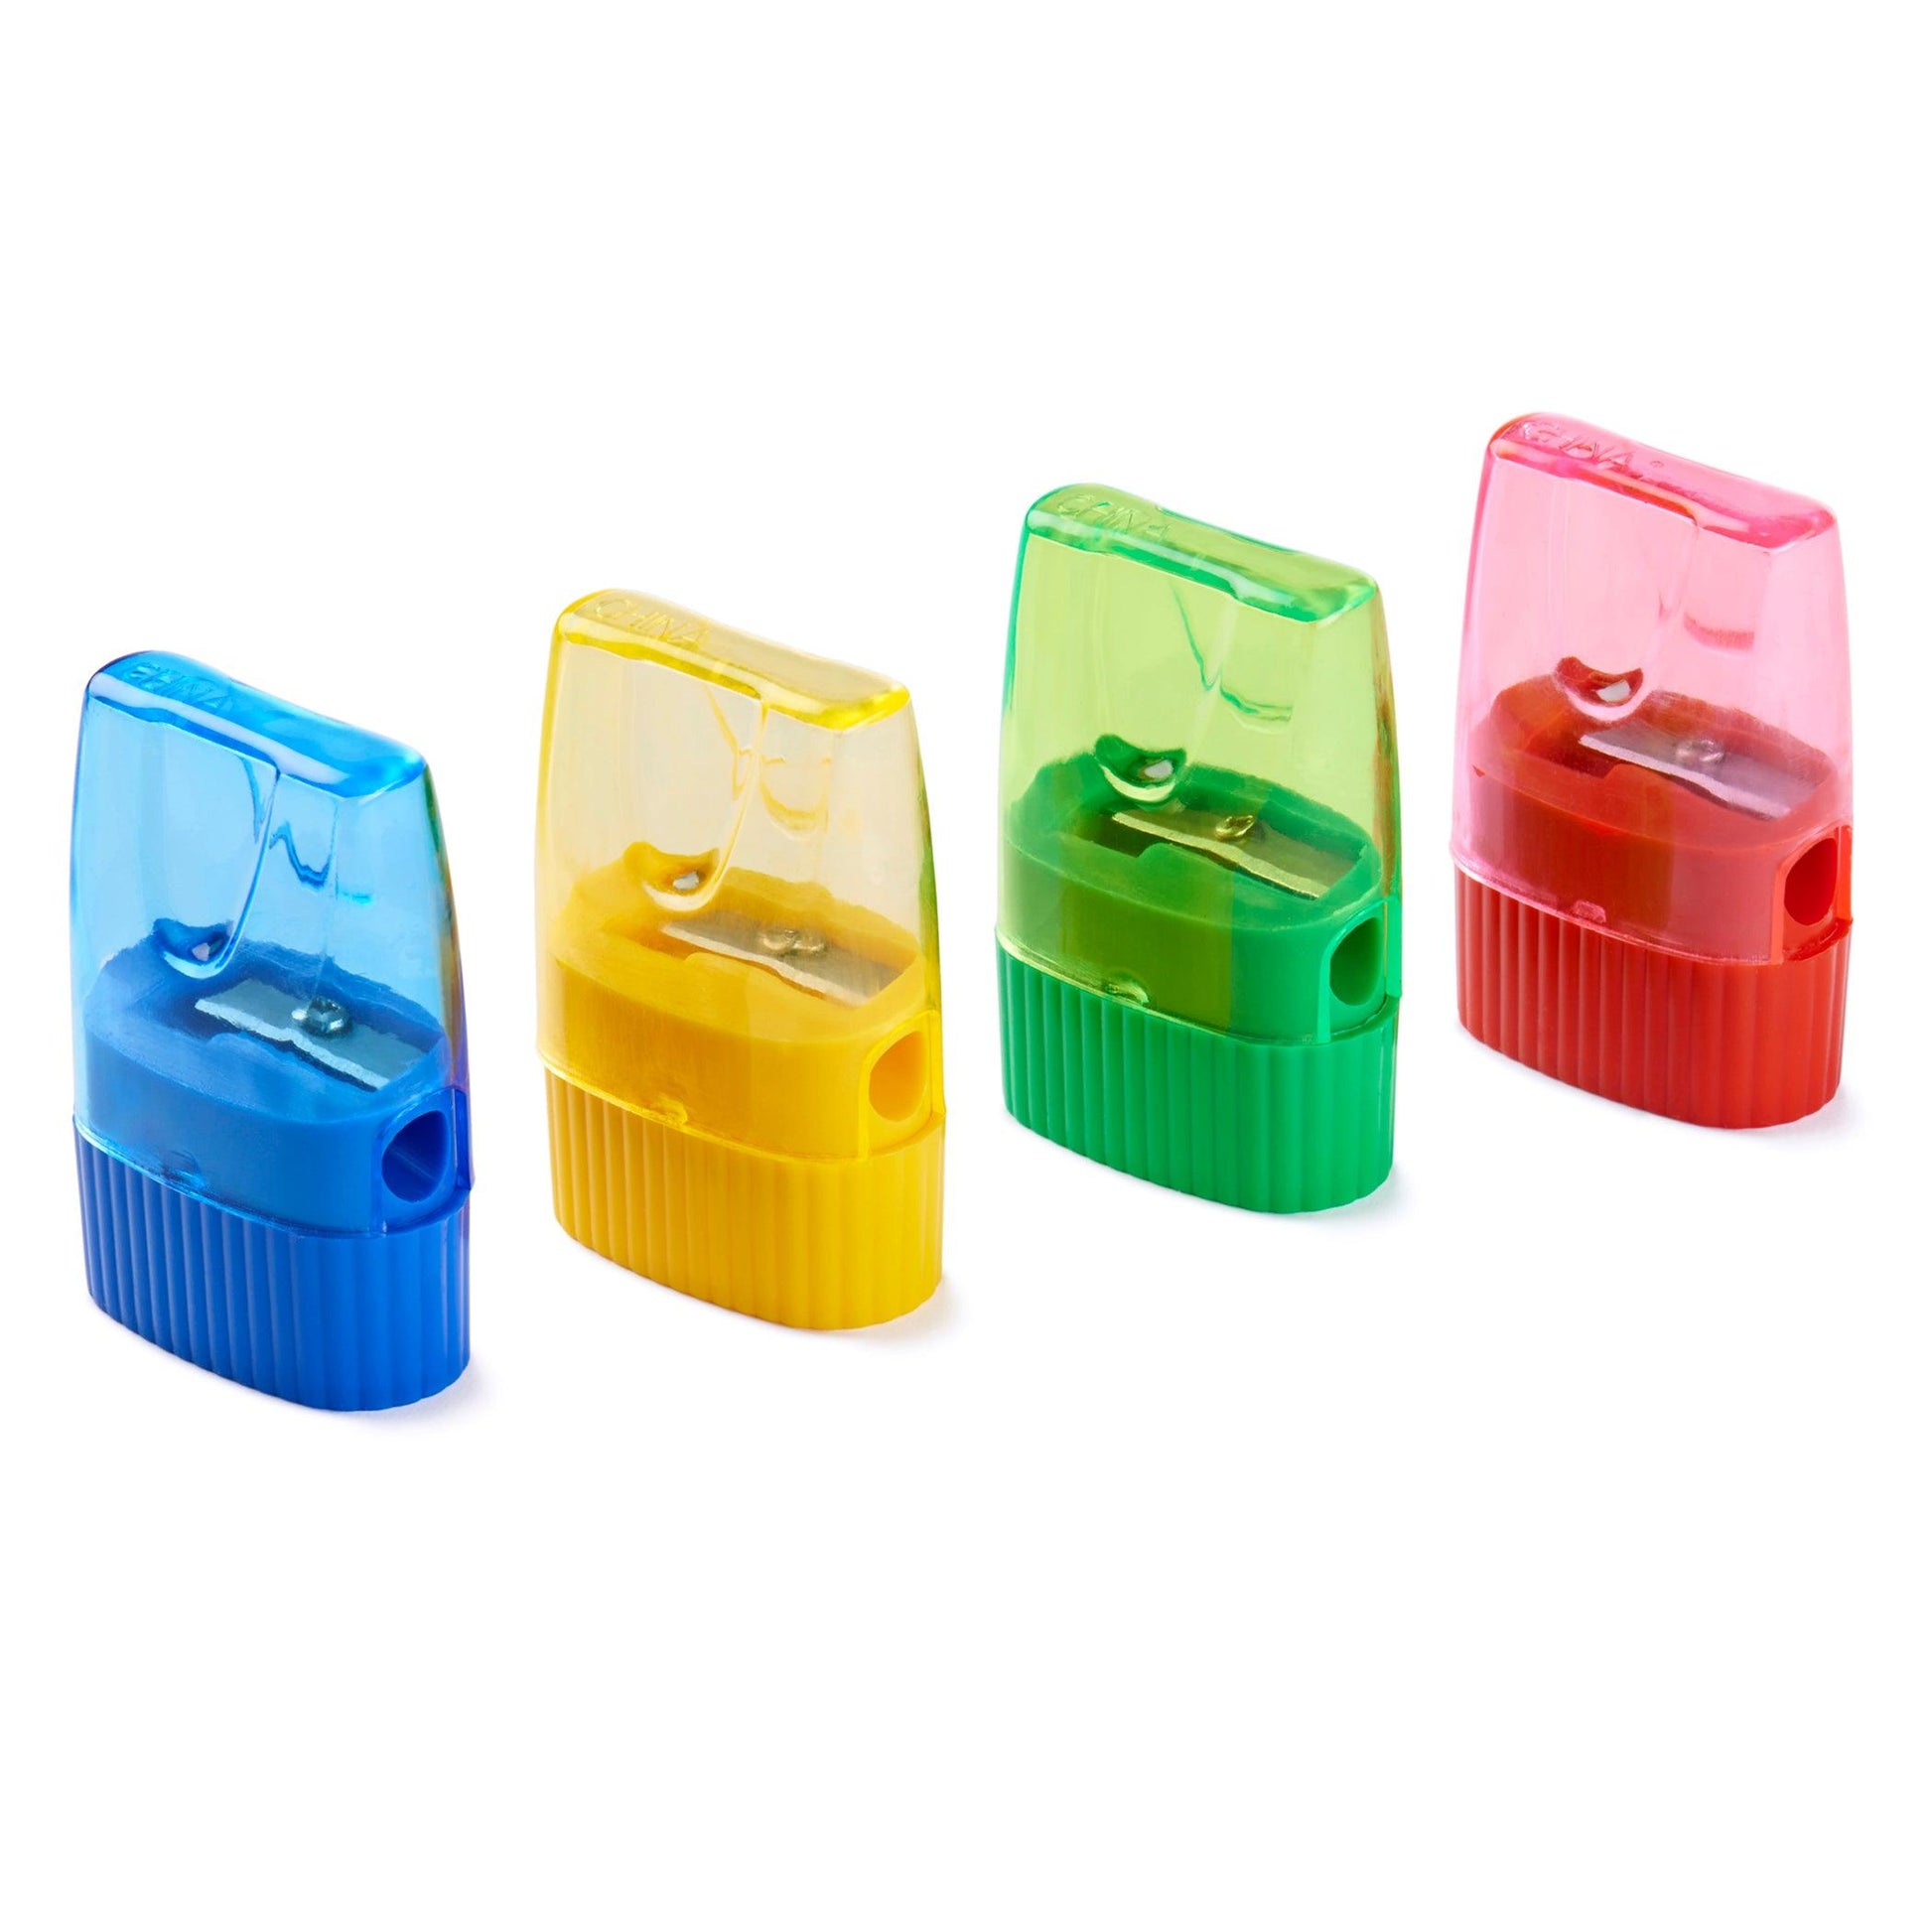 Pencil Sharpener with Cone Shaped Shaving Receptacle, Assorted Colors, 24 Per Pack - Loomini